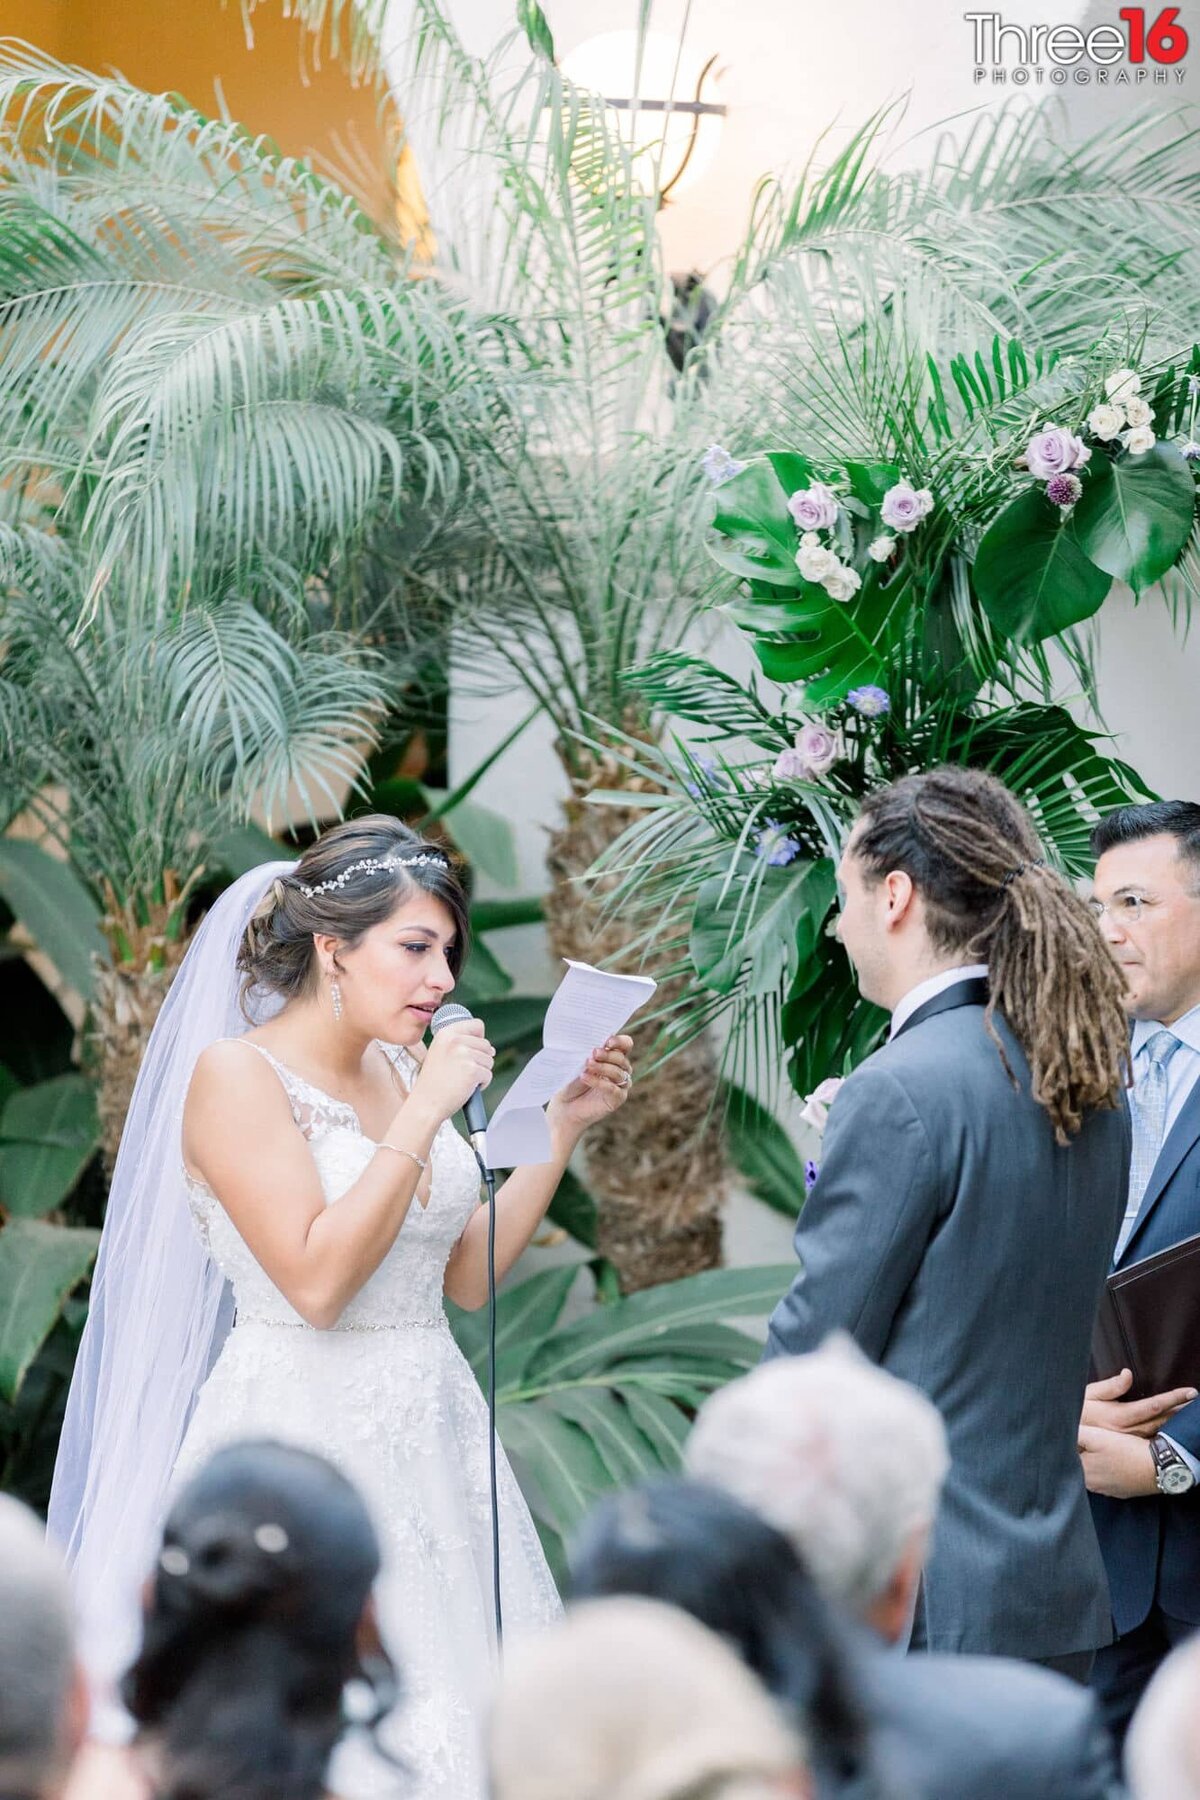 Bride reads her vows to her Groom into the microphone